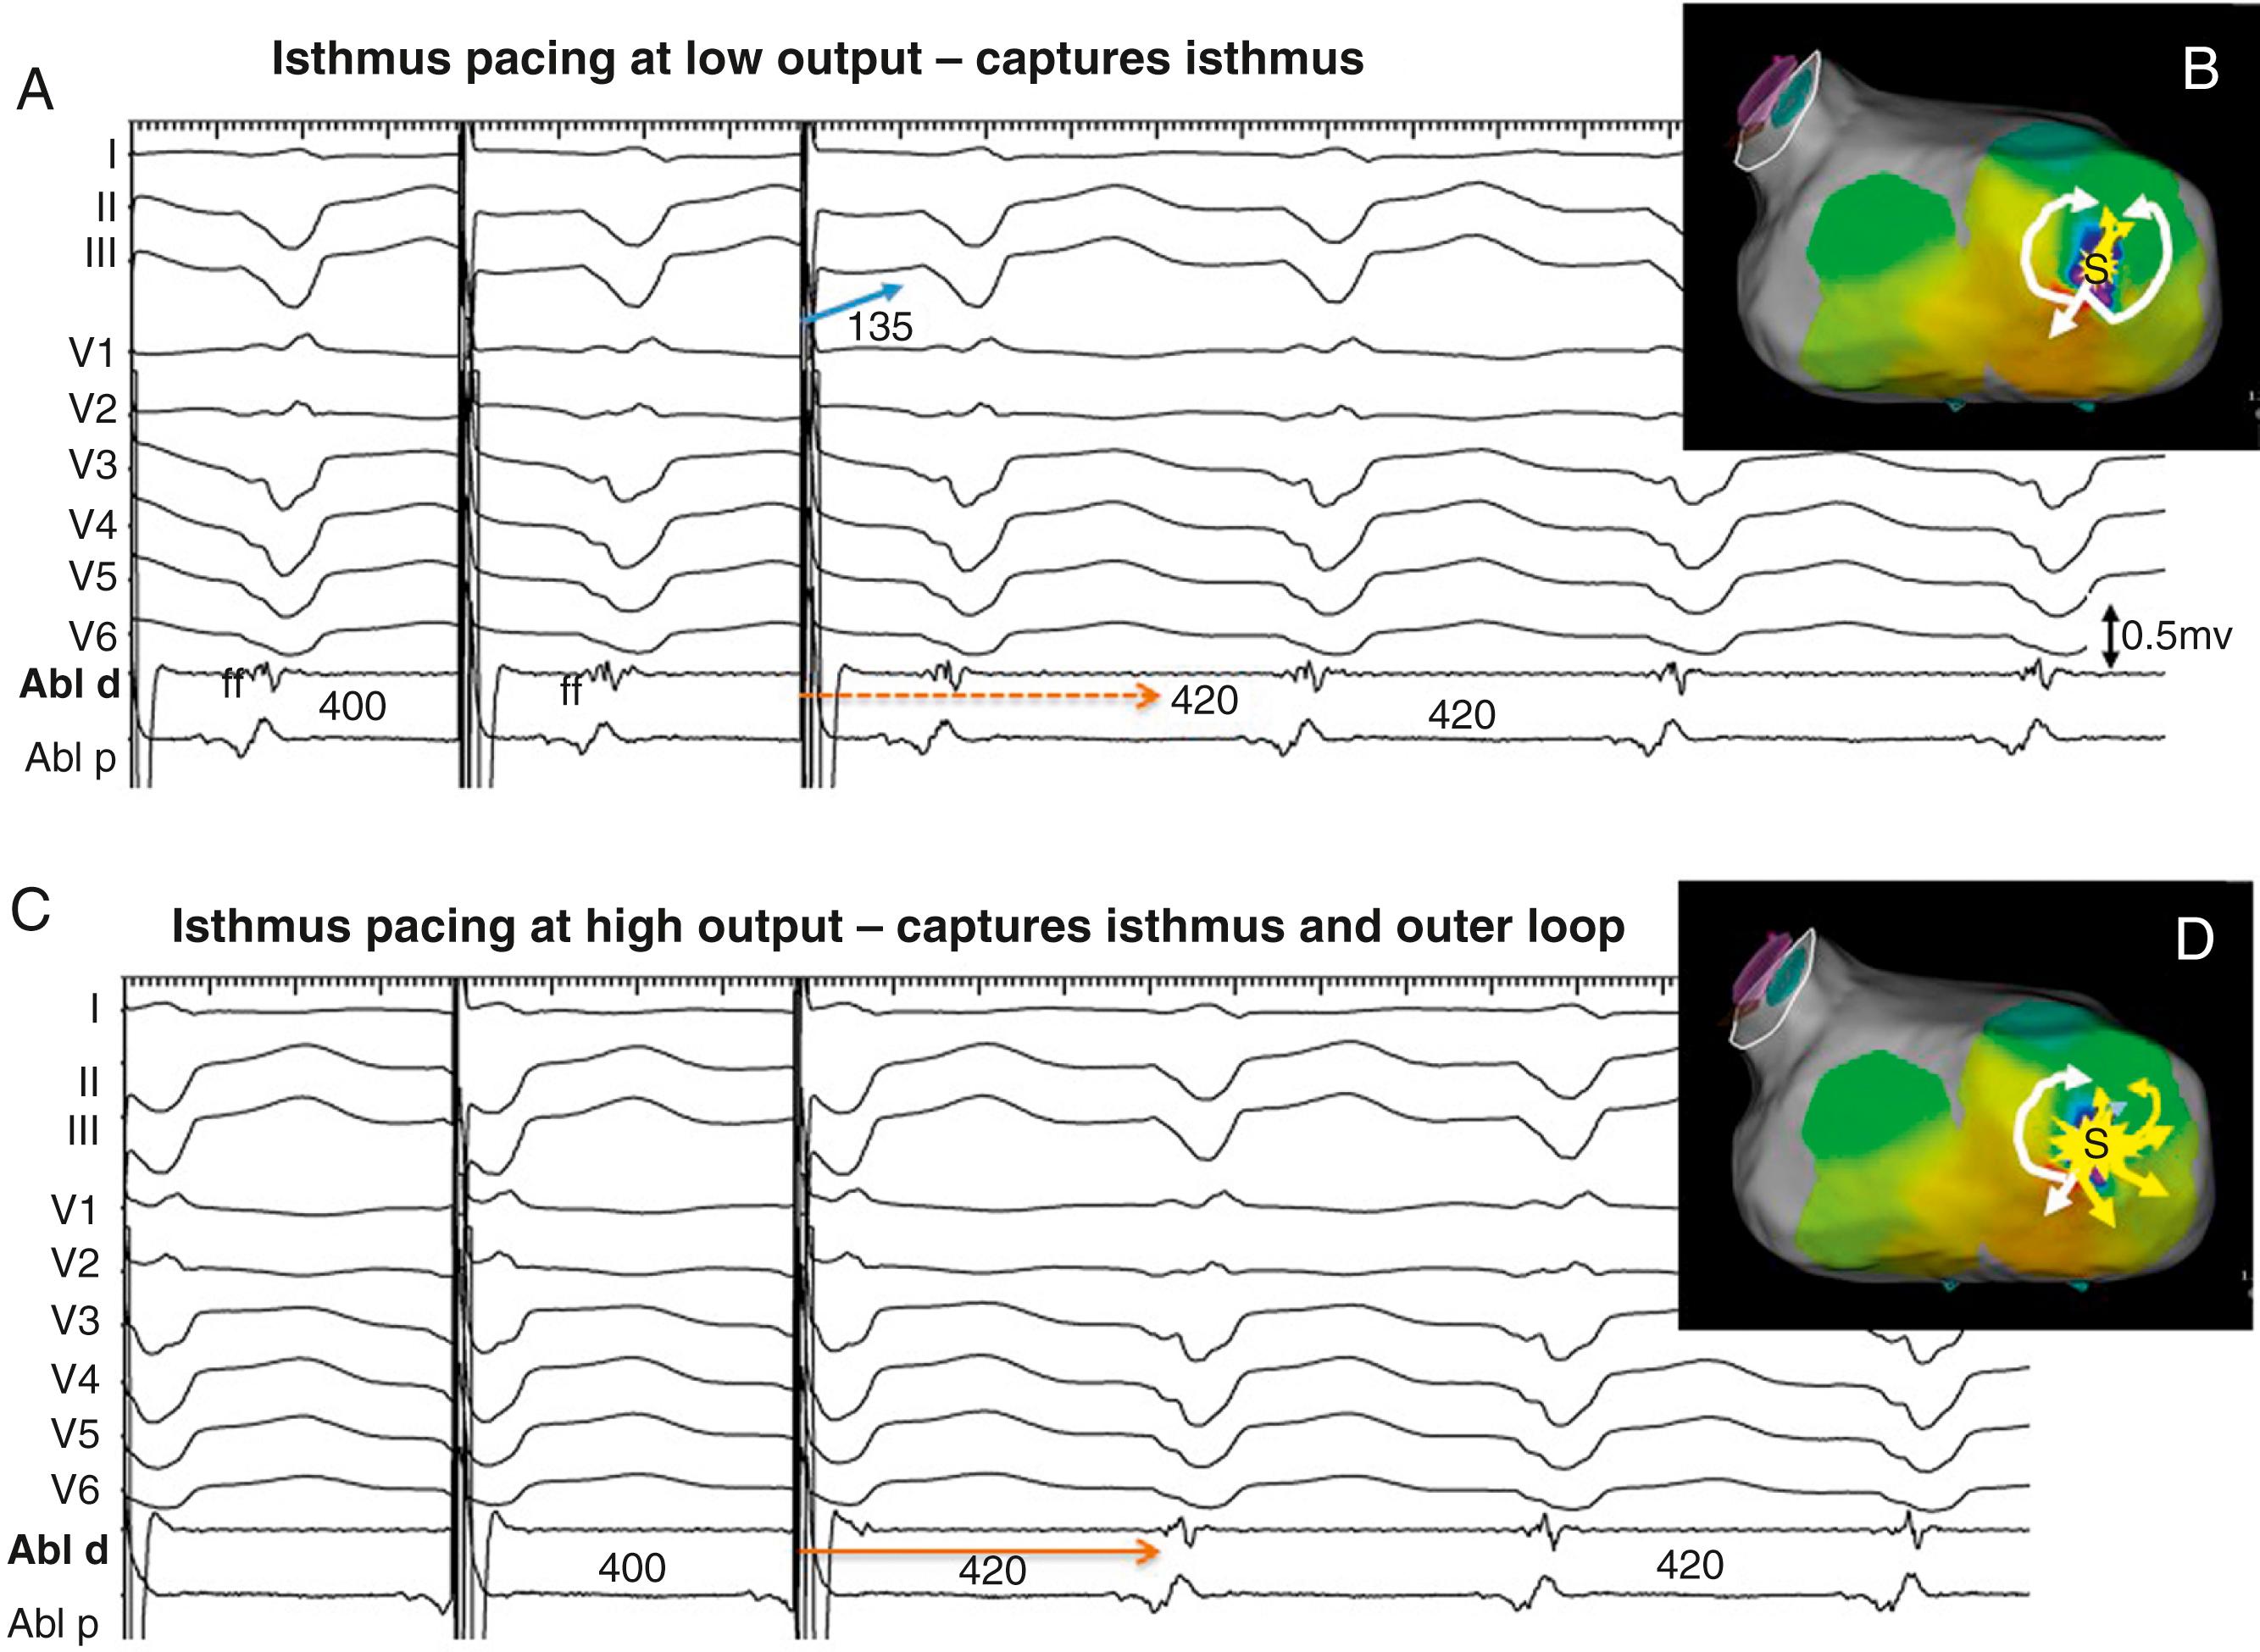 Fig. 129.11, Entrainment from an isthmus site for the same ventricular tachycardia (VT) shown in Figs. 129.2, 129.9, and 129.10